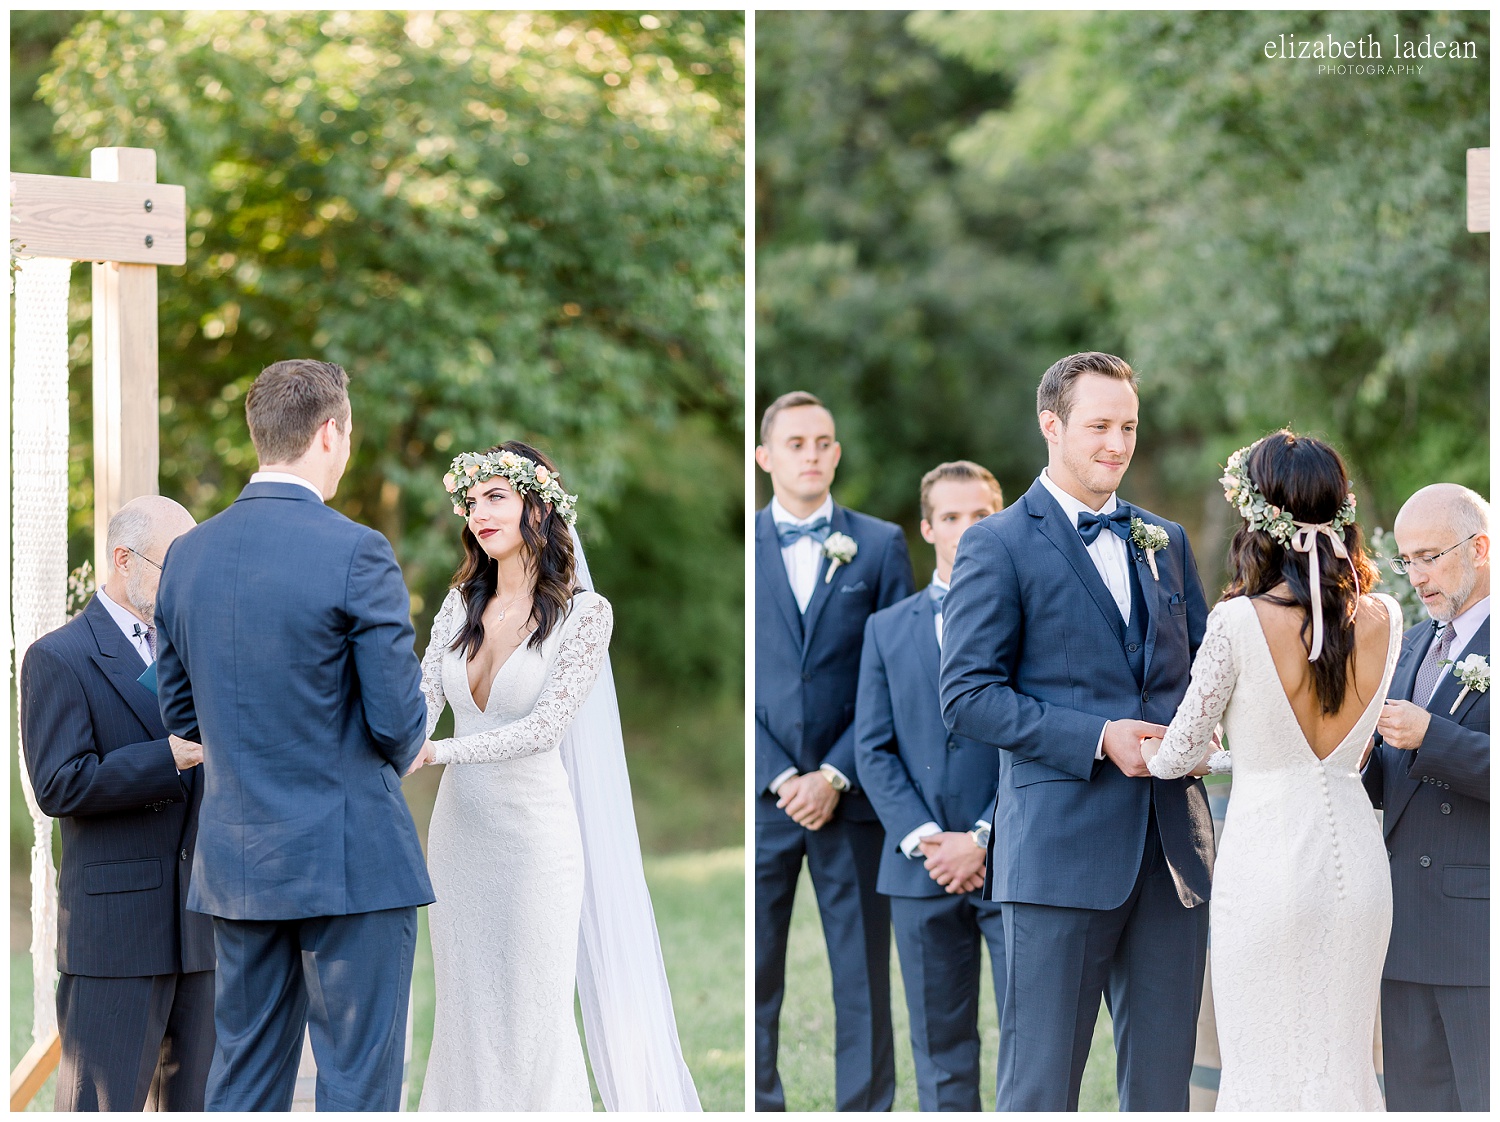 Willow-Creek-Blush-and-Blues-Outdoor-Wedding-Photography-S+Z2018-elizabeth-ladean-photography-photo_0571.jpg